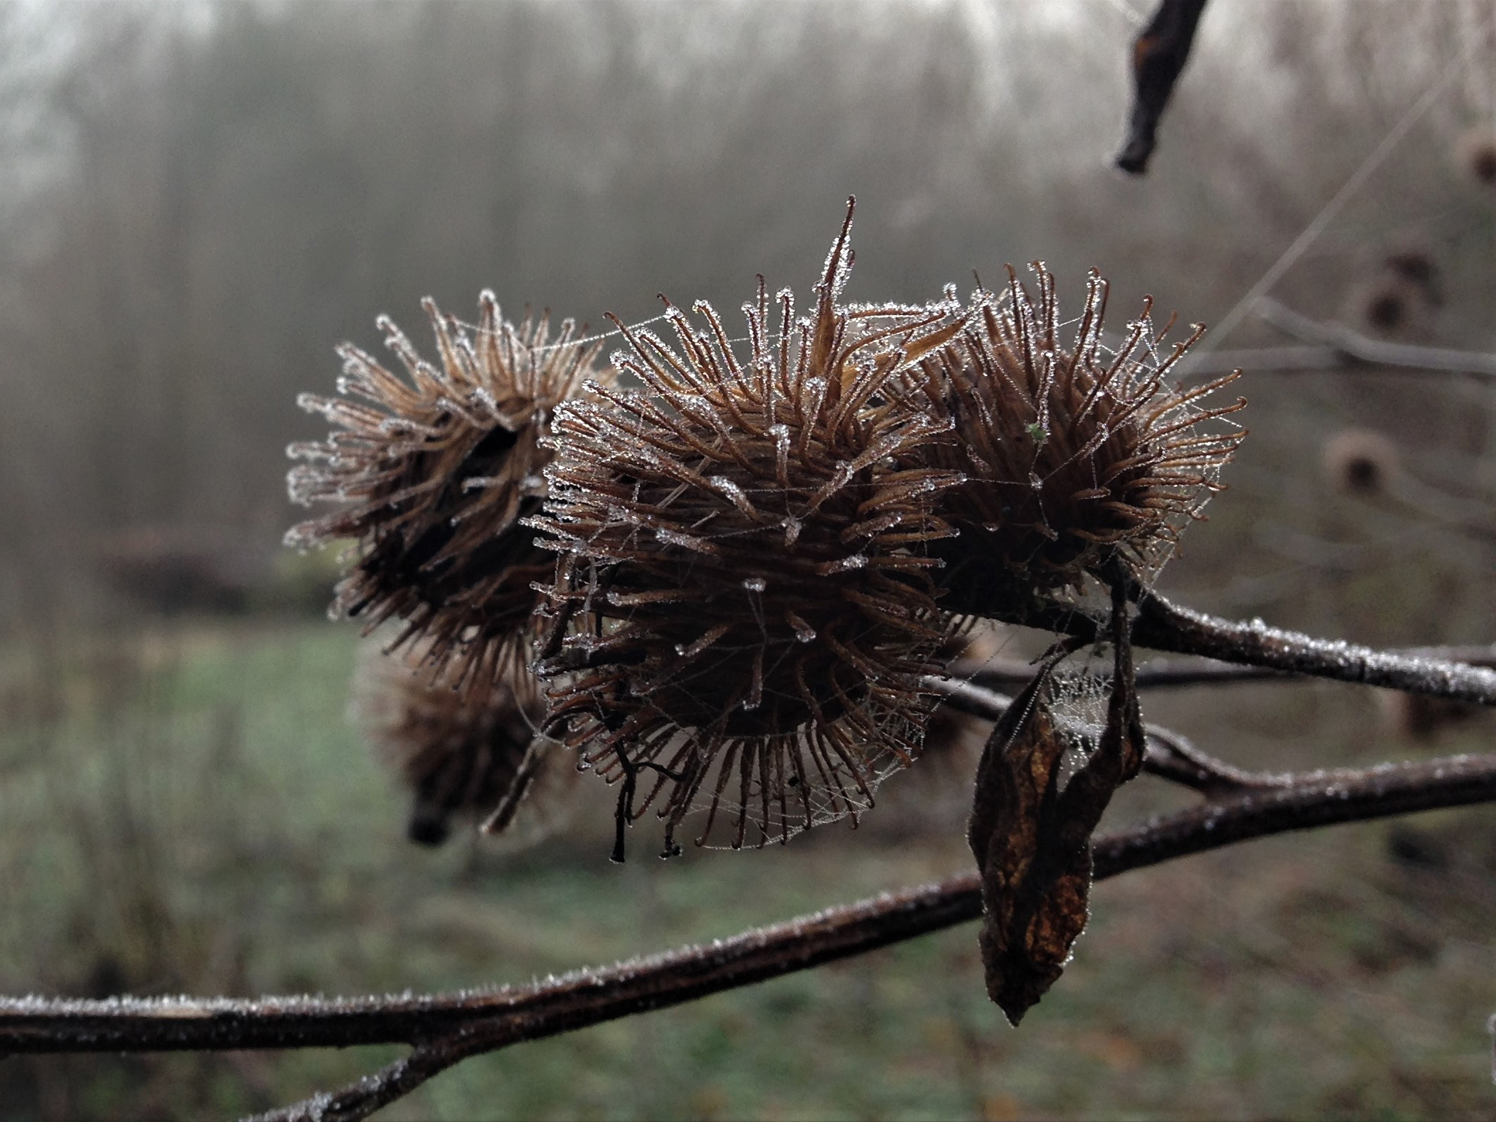 Burdock, an invasive weed with sticky burs, has many uses.